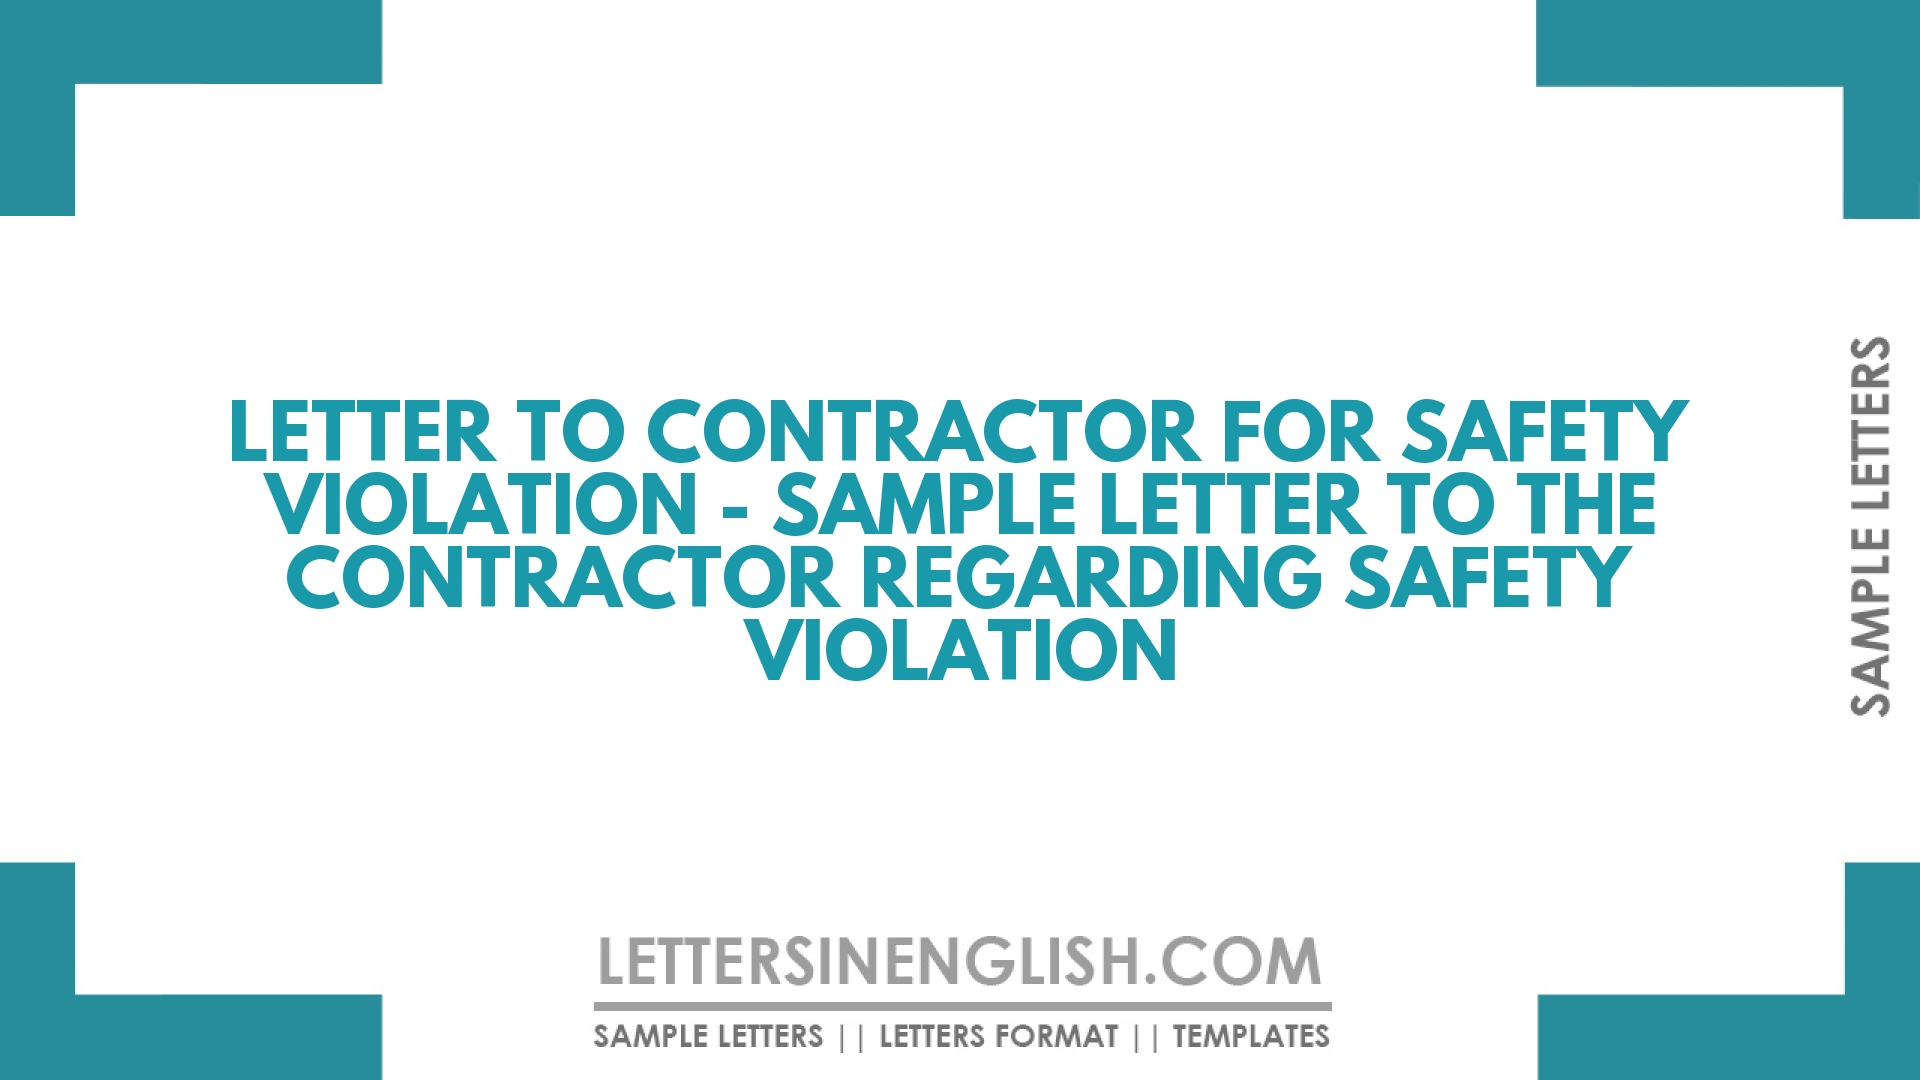 Letter to Contractor for Safety Violation – Sample Letter to the Contractor Regarding Safety Violation